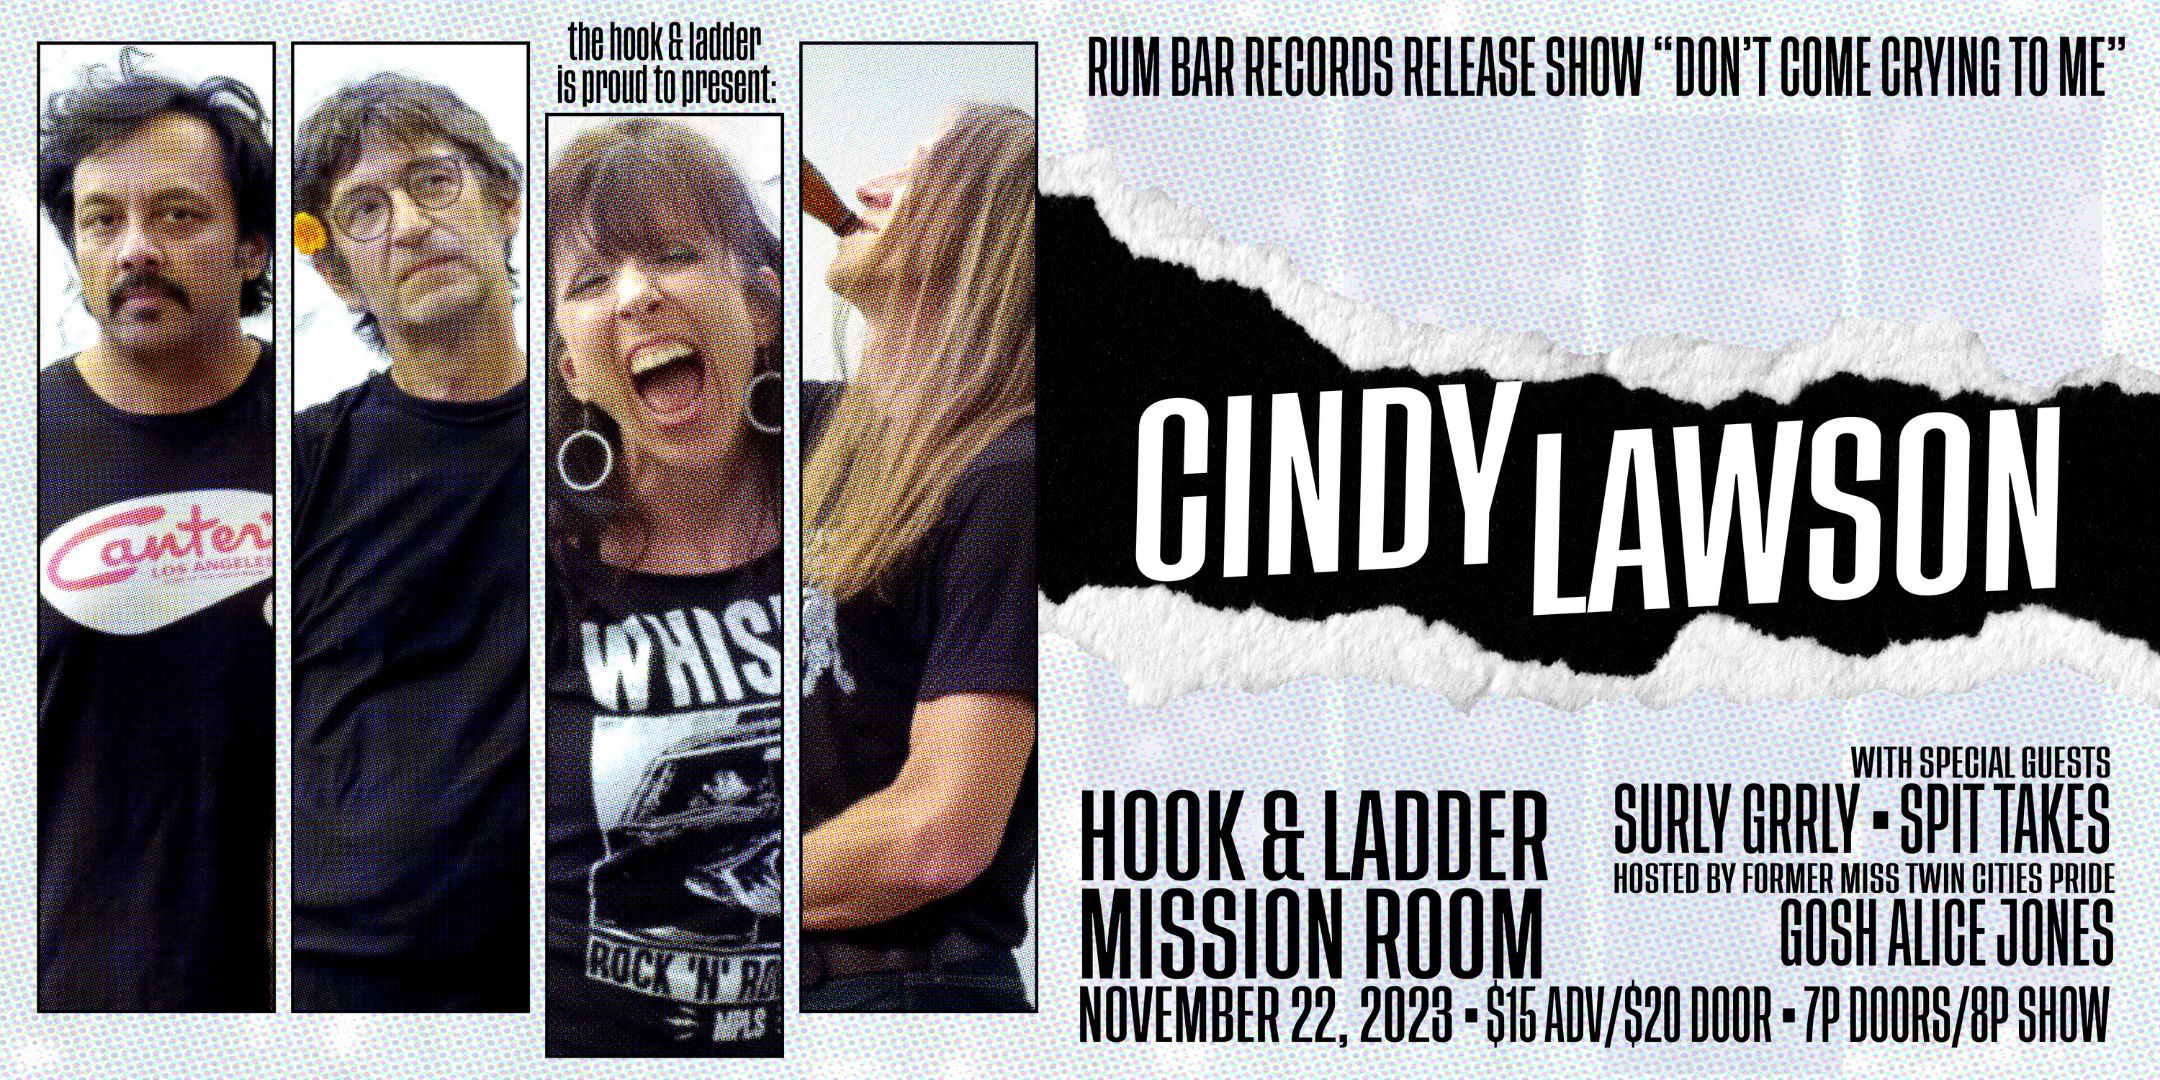 Cindy Lawson "Don't Come Crying To Me" Rum Bar Records Release Party with Spit Takes & Surly Grrly Wednesday, November 22 The Mission Room at The Hook and Ladder Theater Doors 7:00pm :: Show 8pm :: 21+ General Admission*: $15 ADV/ $20 DOS